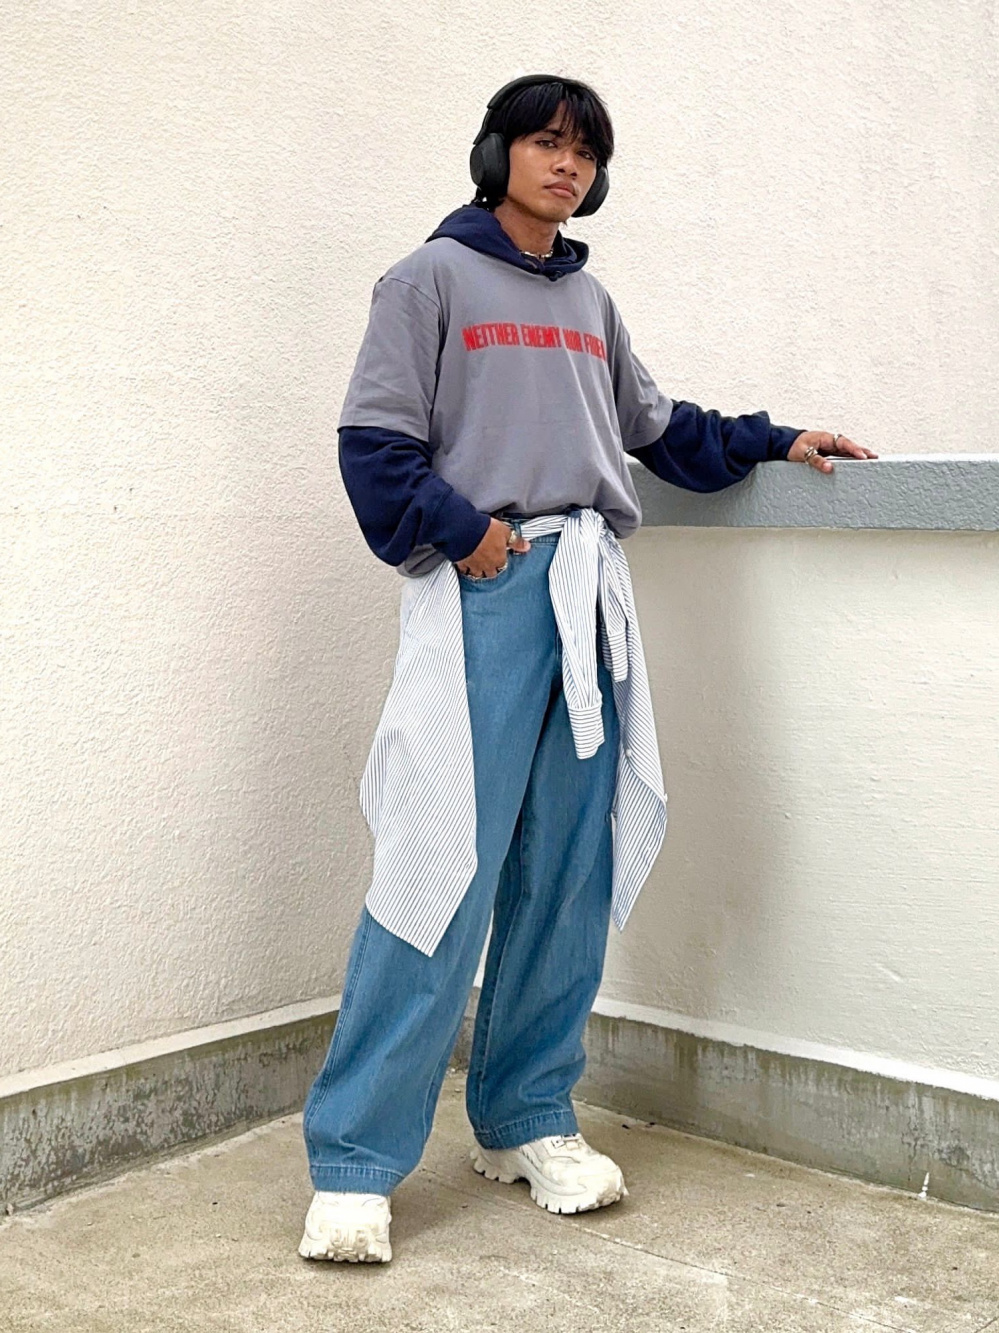 Check styling ideas for「SWEAT SHORTS」